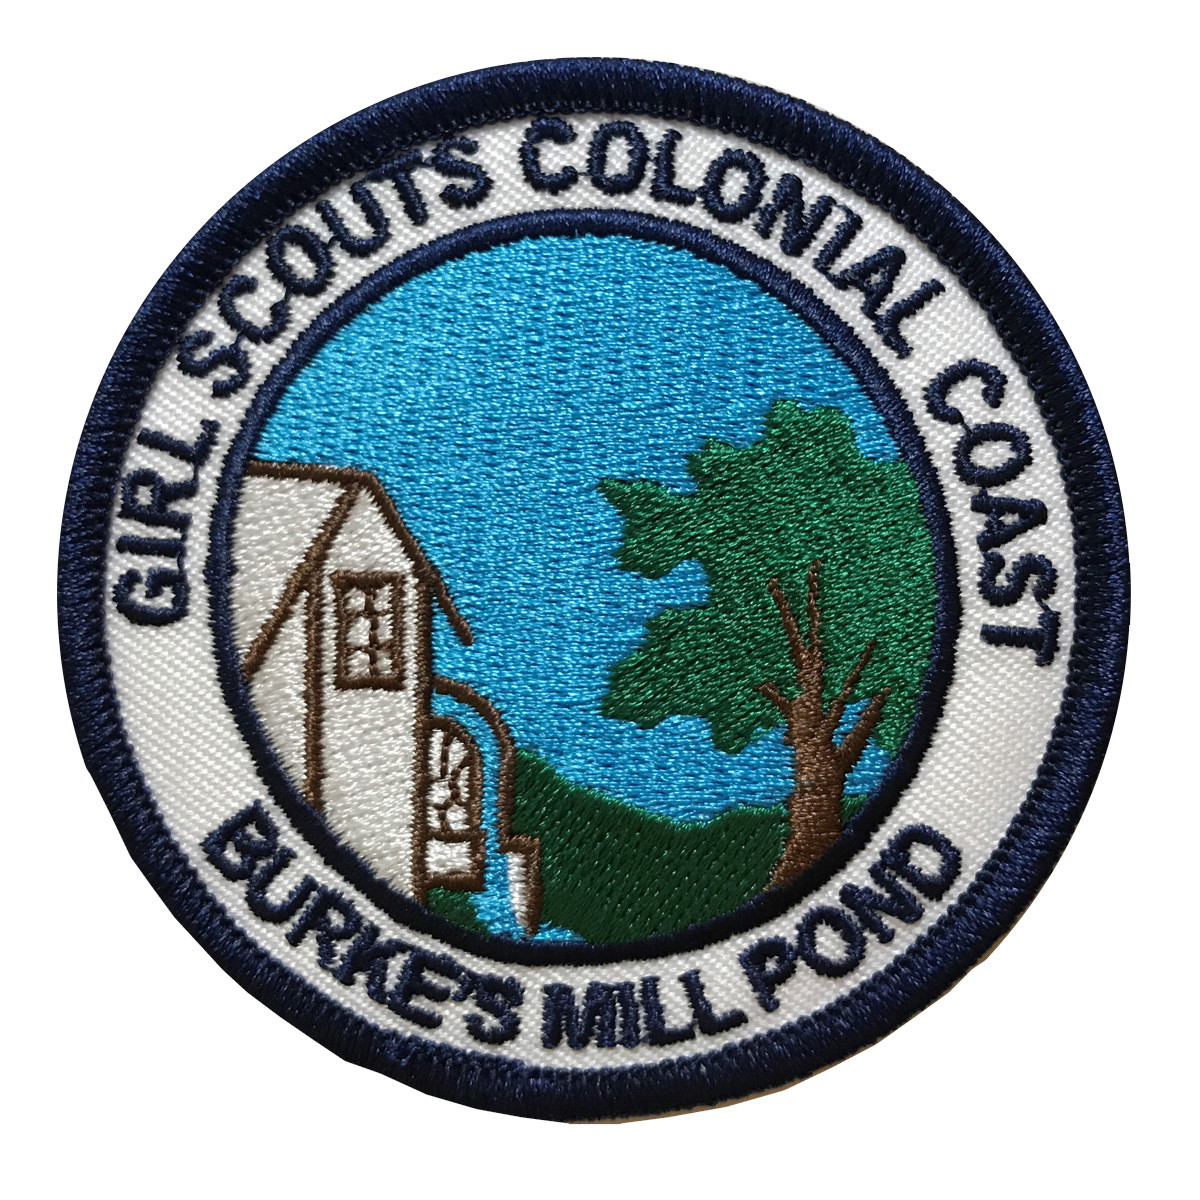 Camp Burke’s Mill Patch